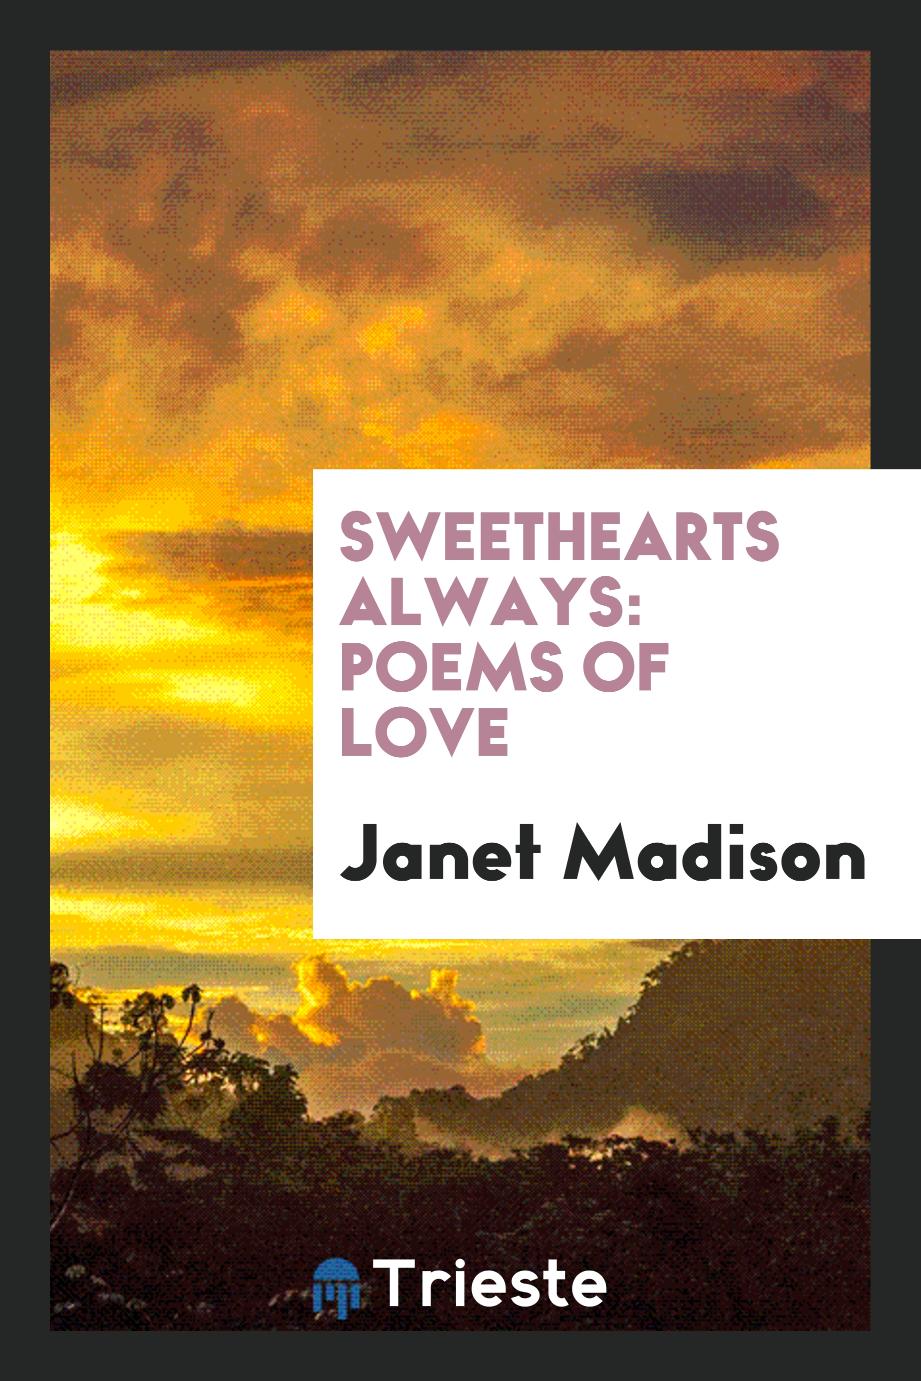 Sweethearts Always: Poems of Love